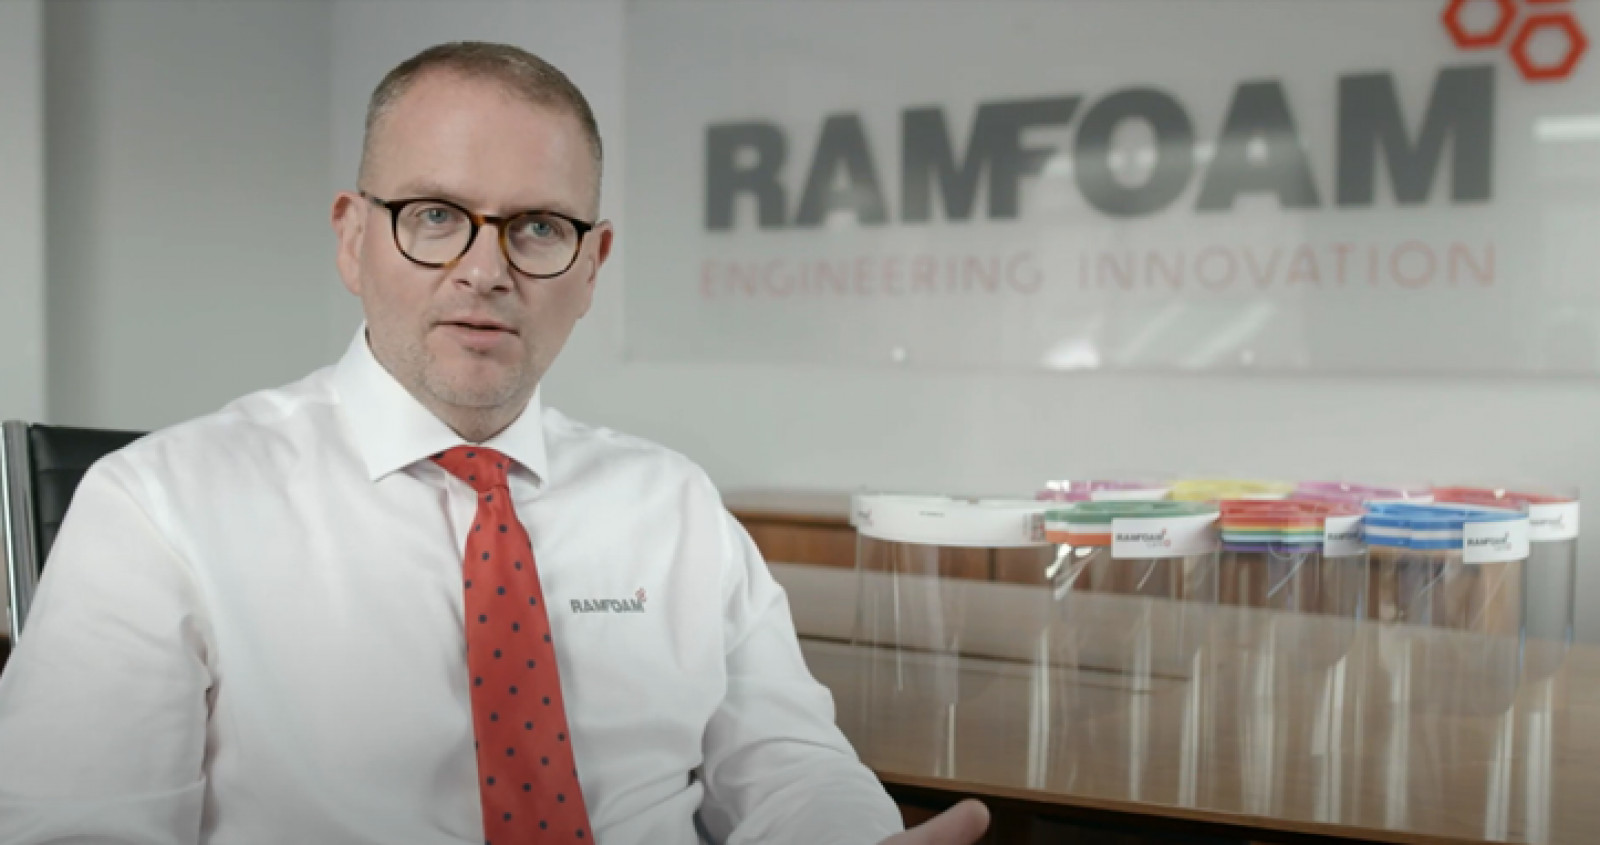 Ramfoam creates over 500 jobs in 2020 and plans to continue recruiting